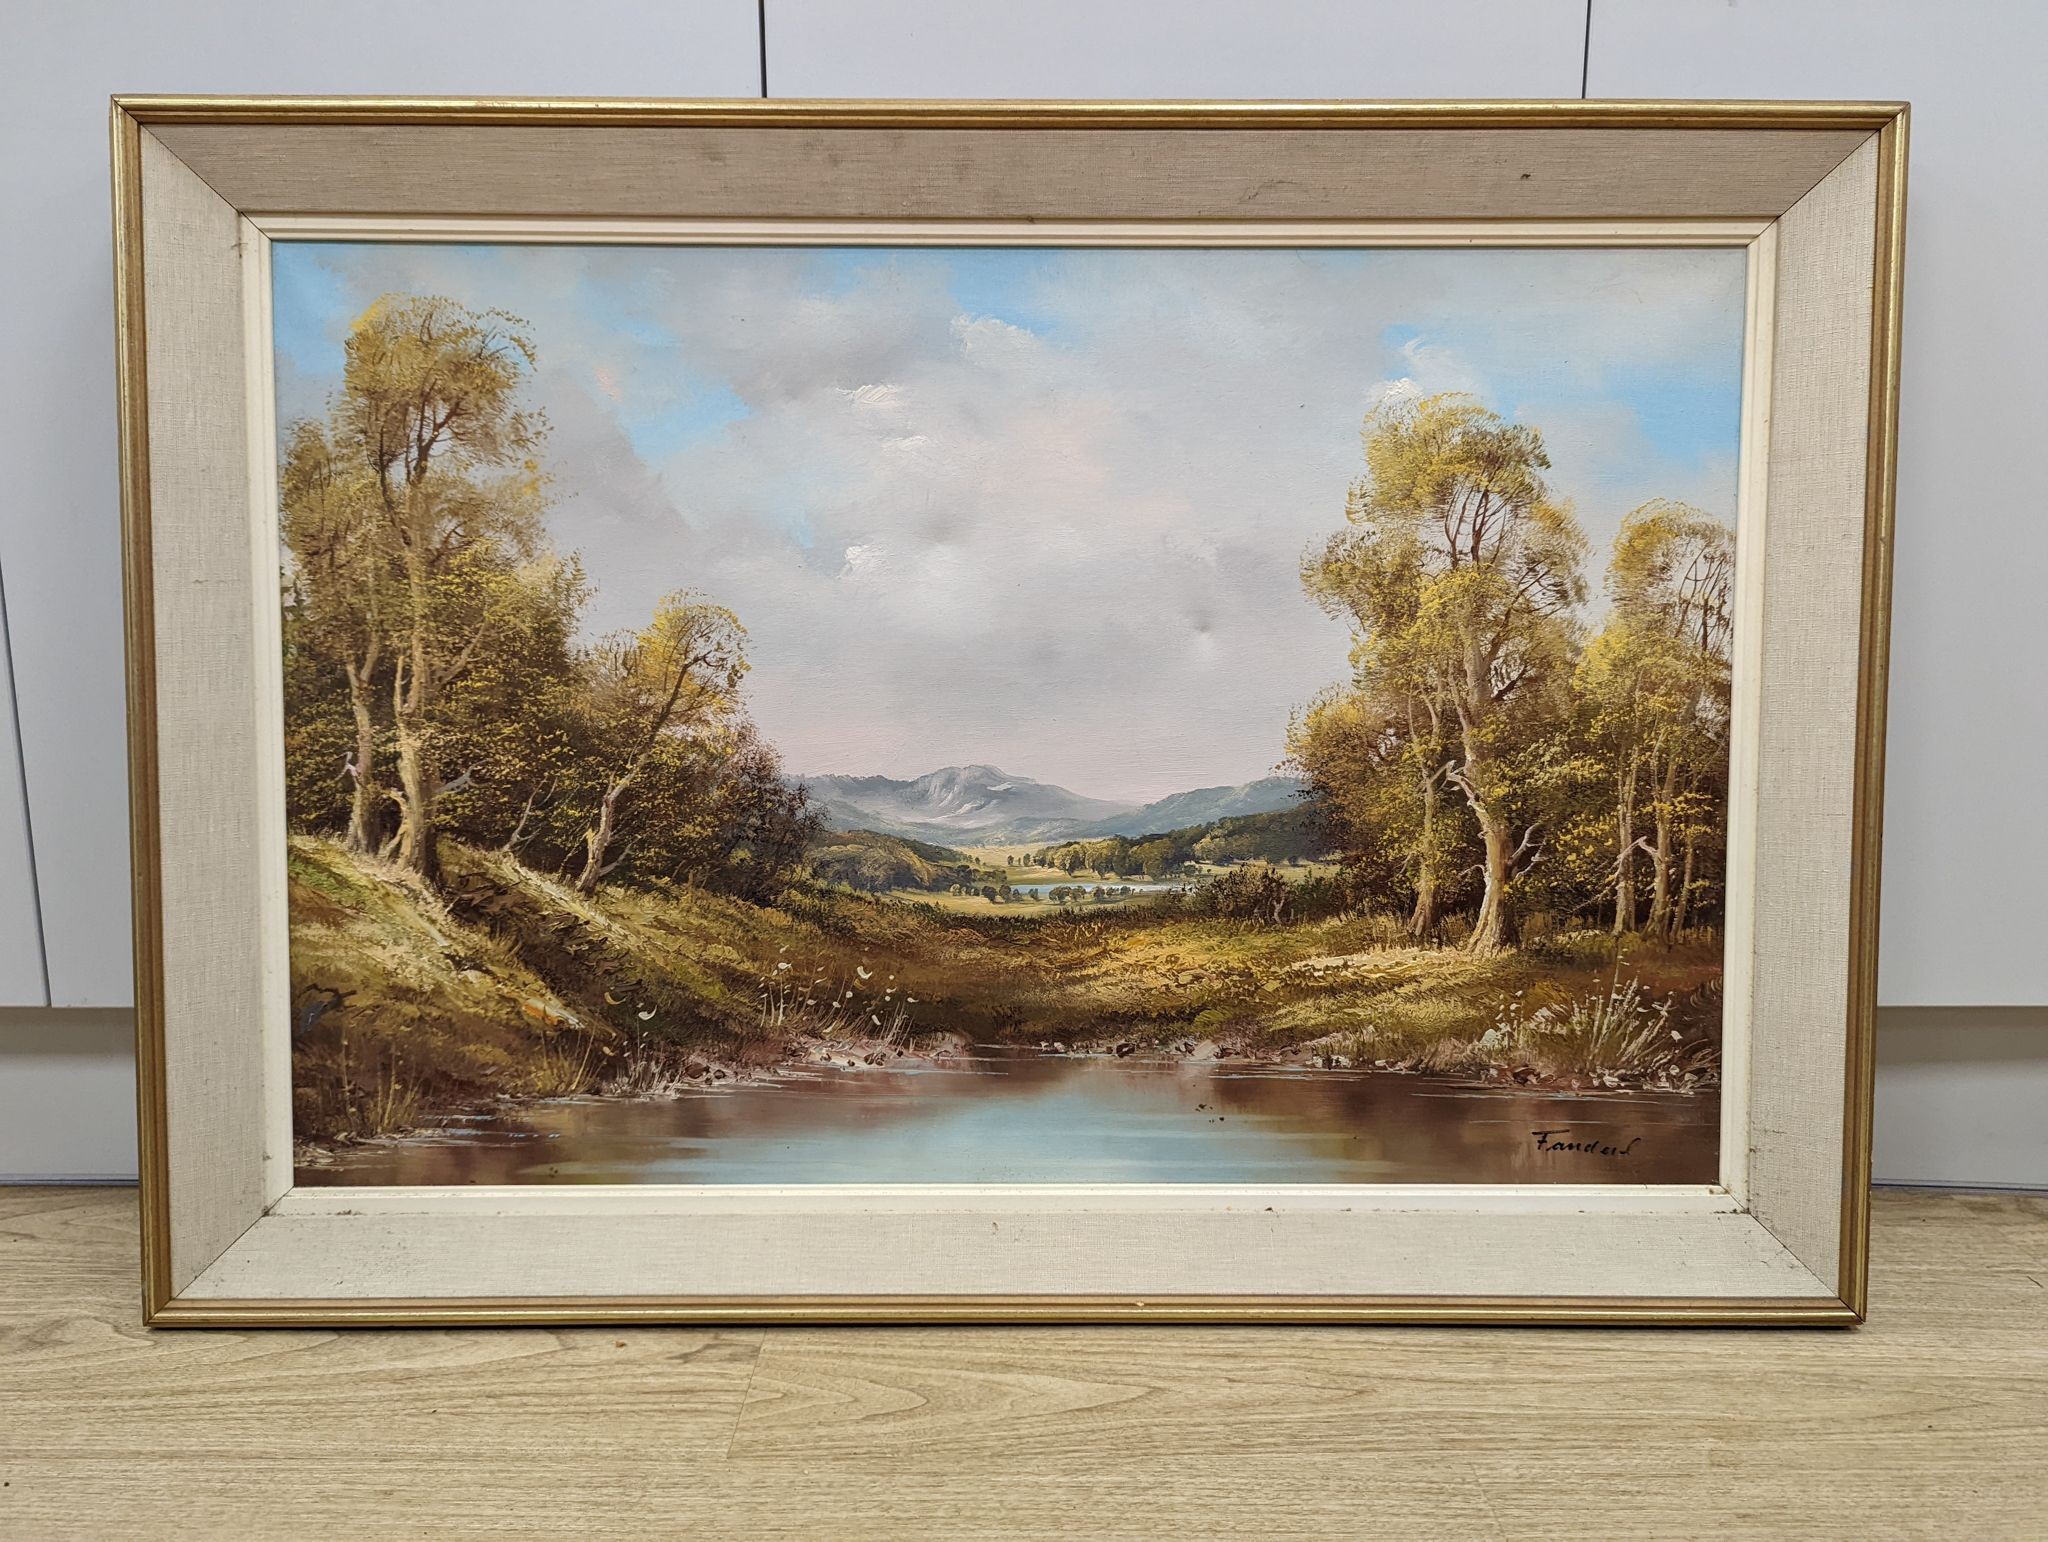 Fanderl, oil on canvas, 'The Quiet Pool', signed with Stacy Marks label verso dated 1975, 60 x 90cm